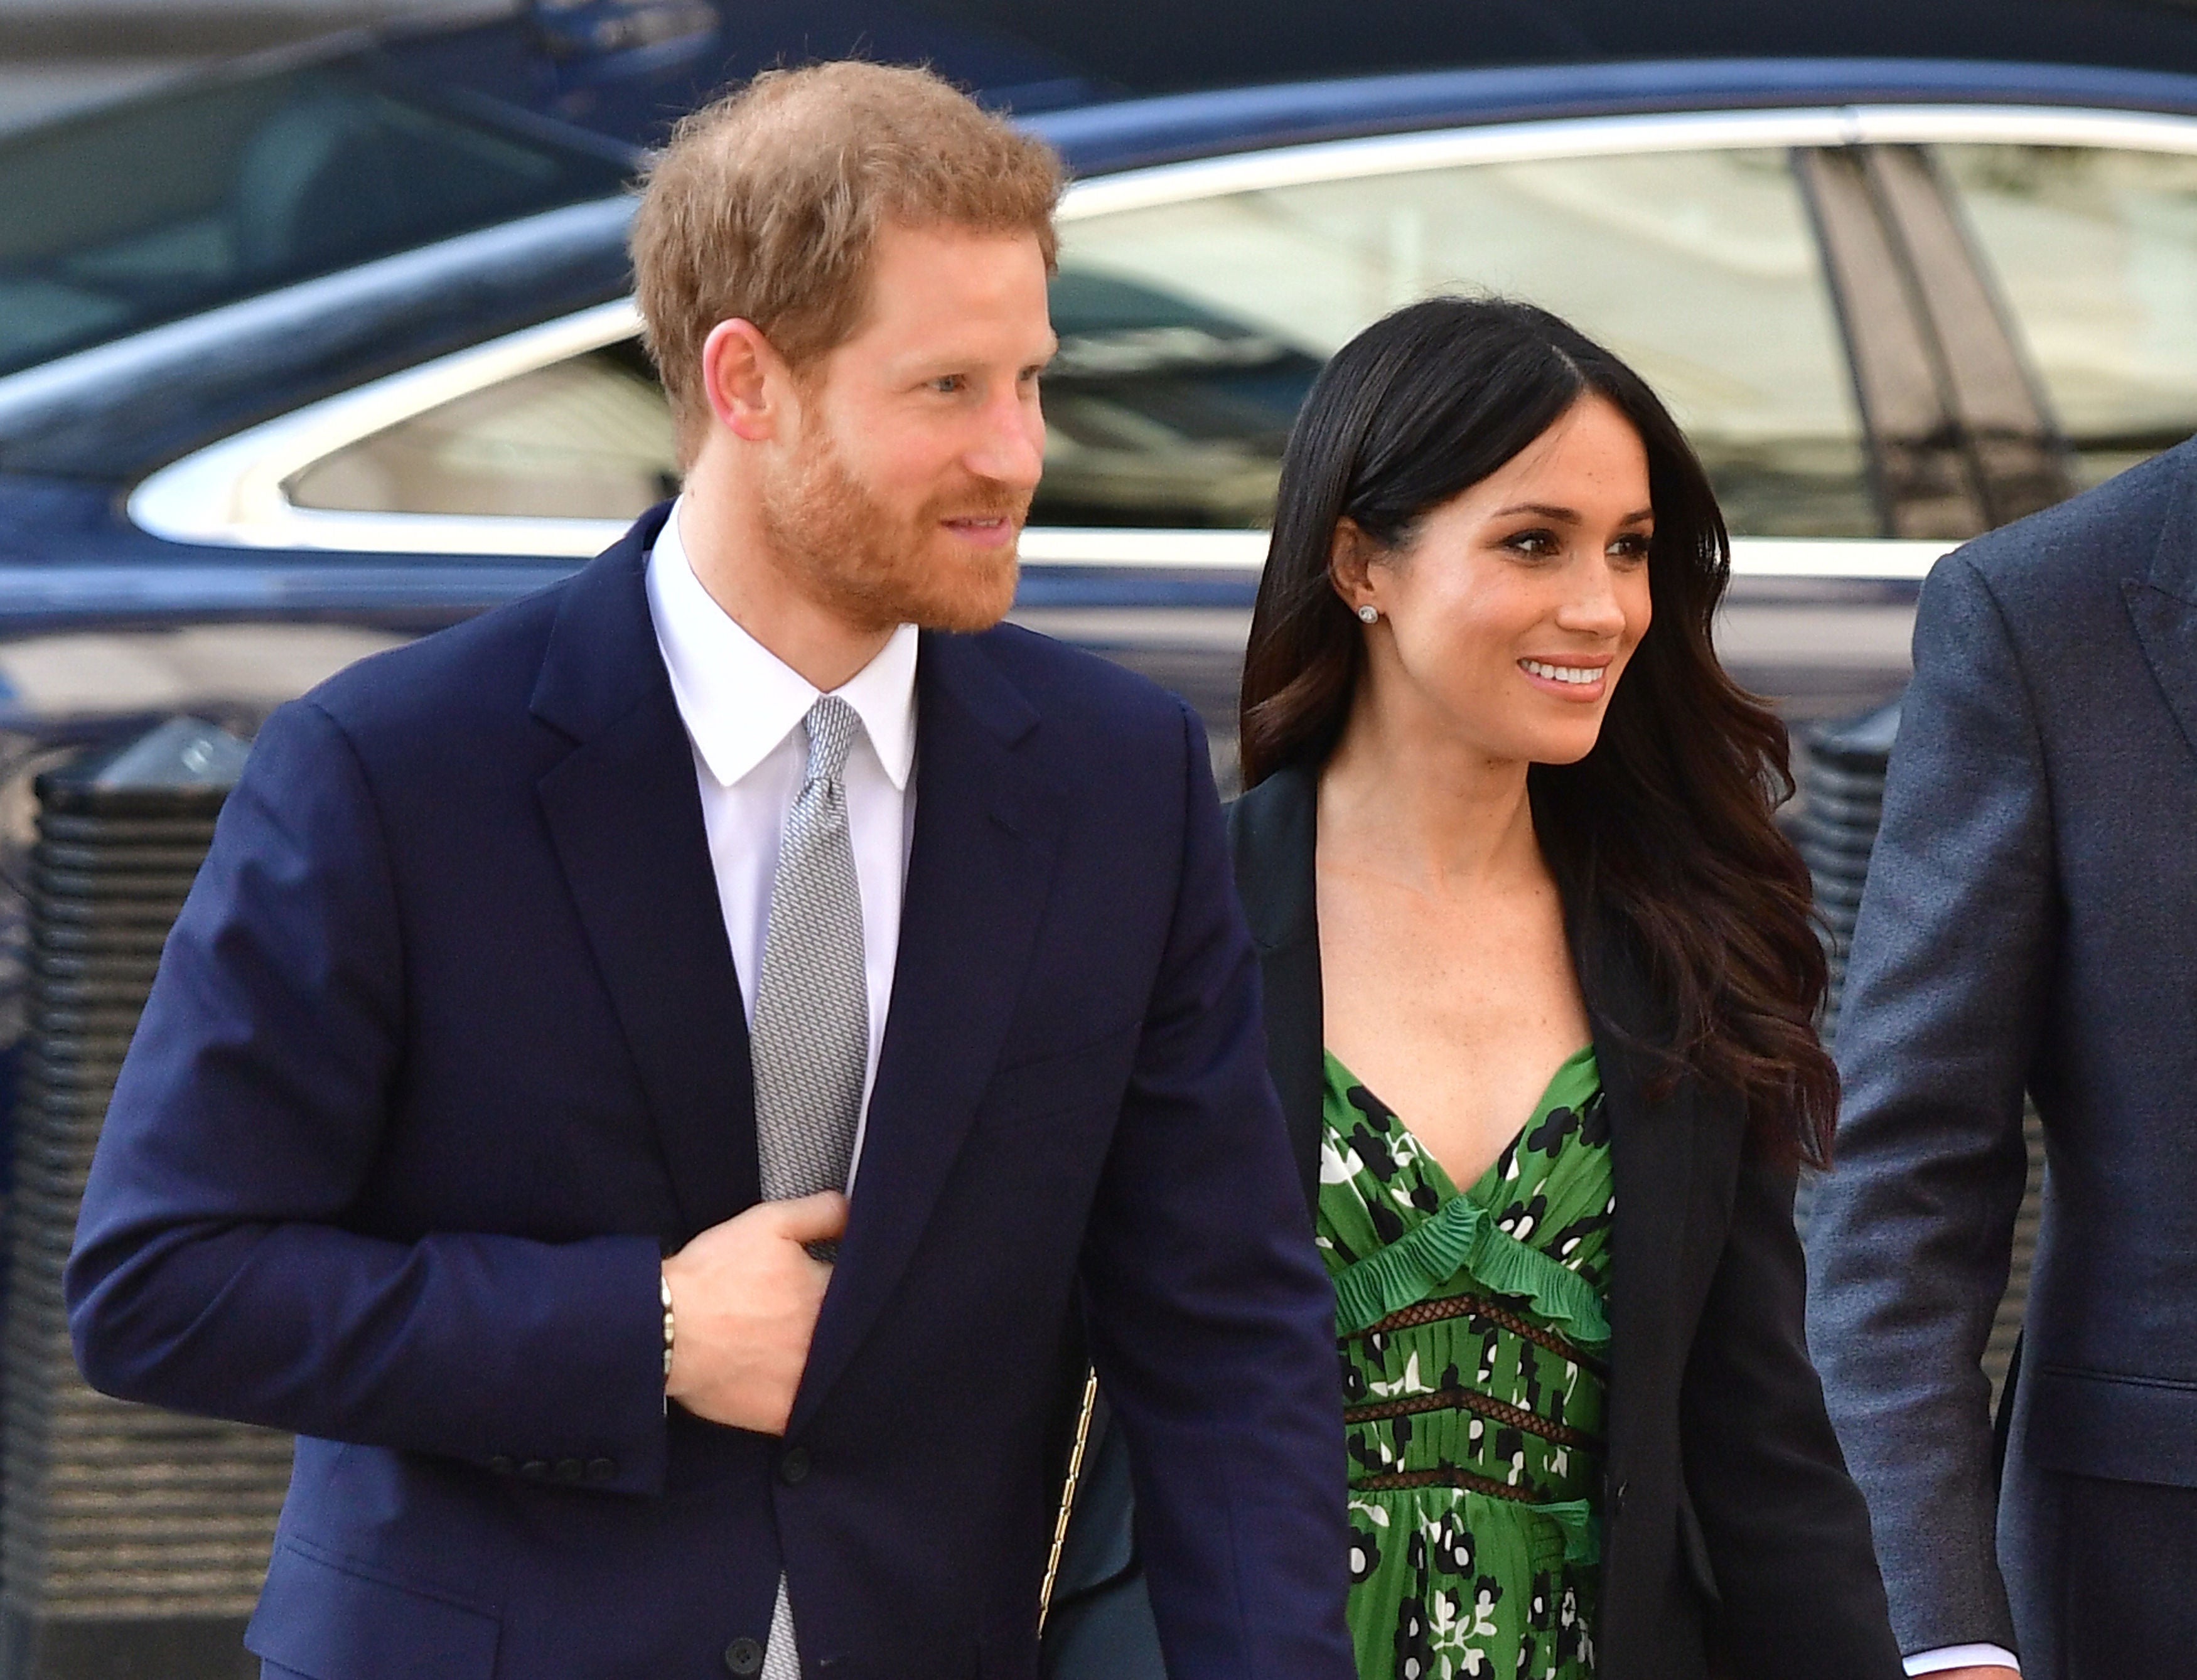 Meghan and Harry in 2018 before they stood down as senior members of the royal family